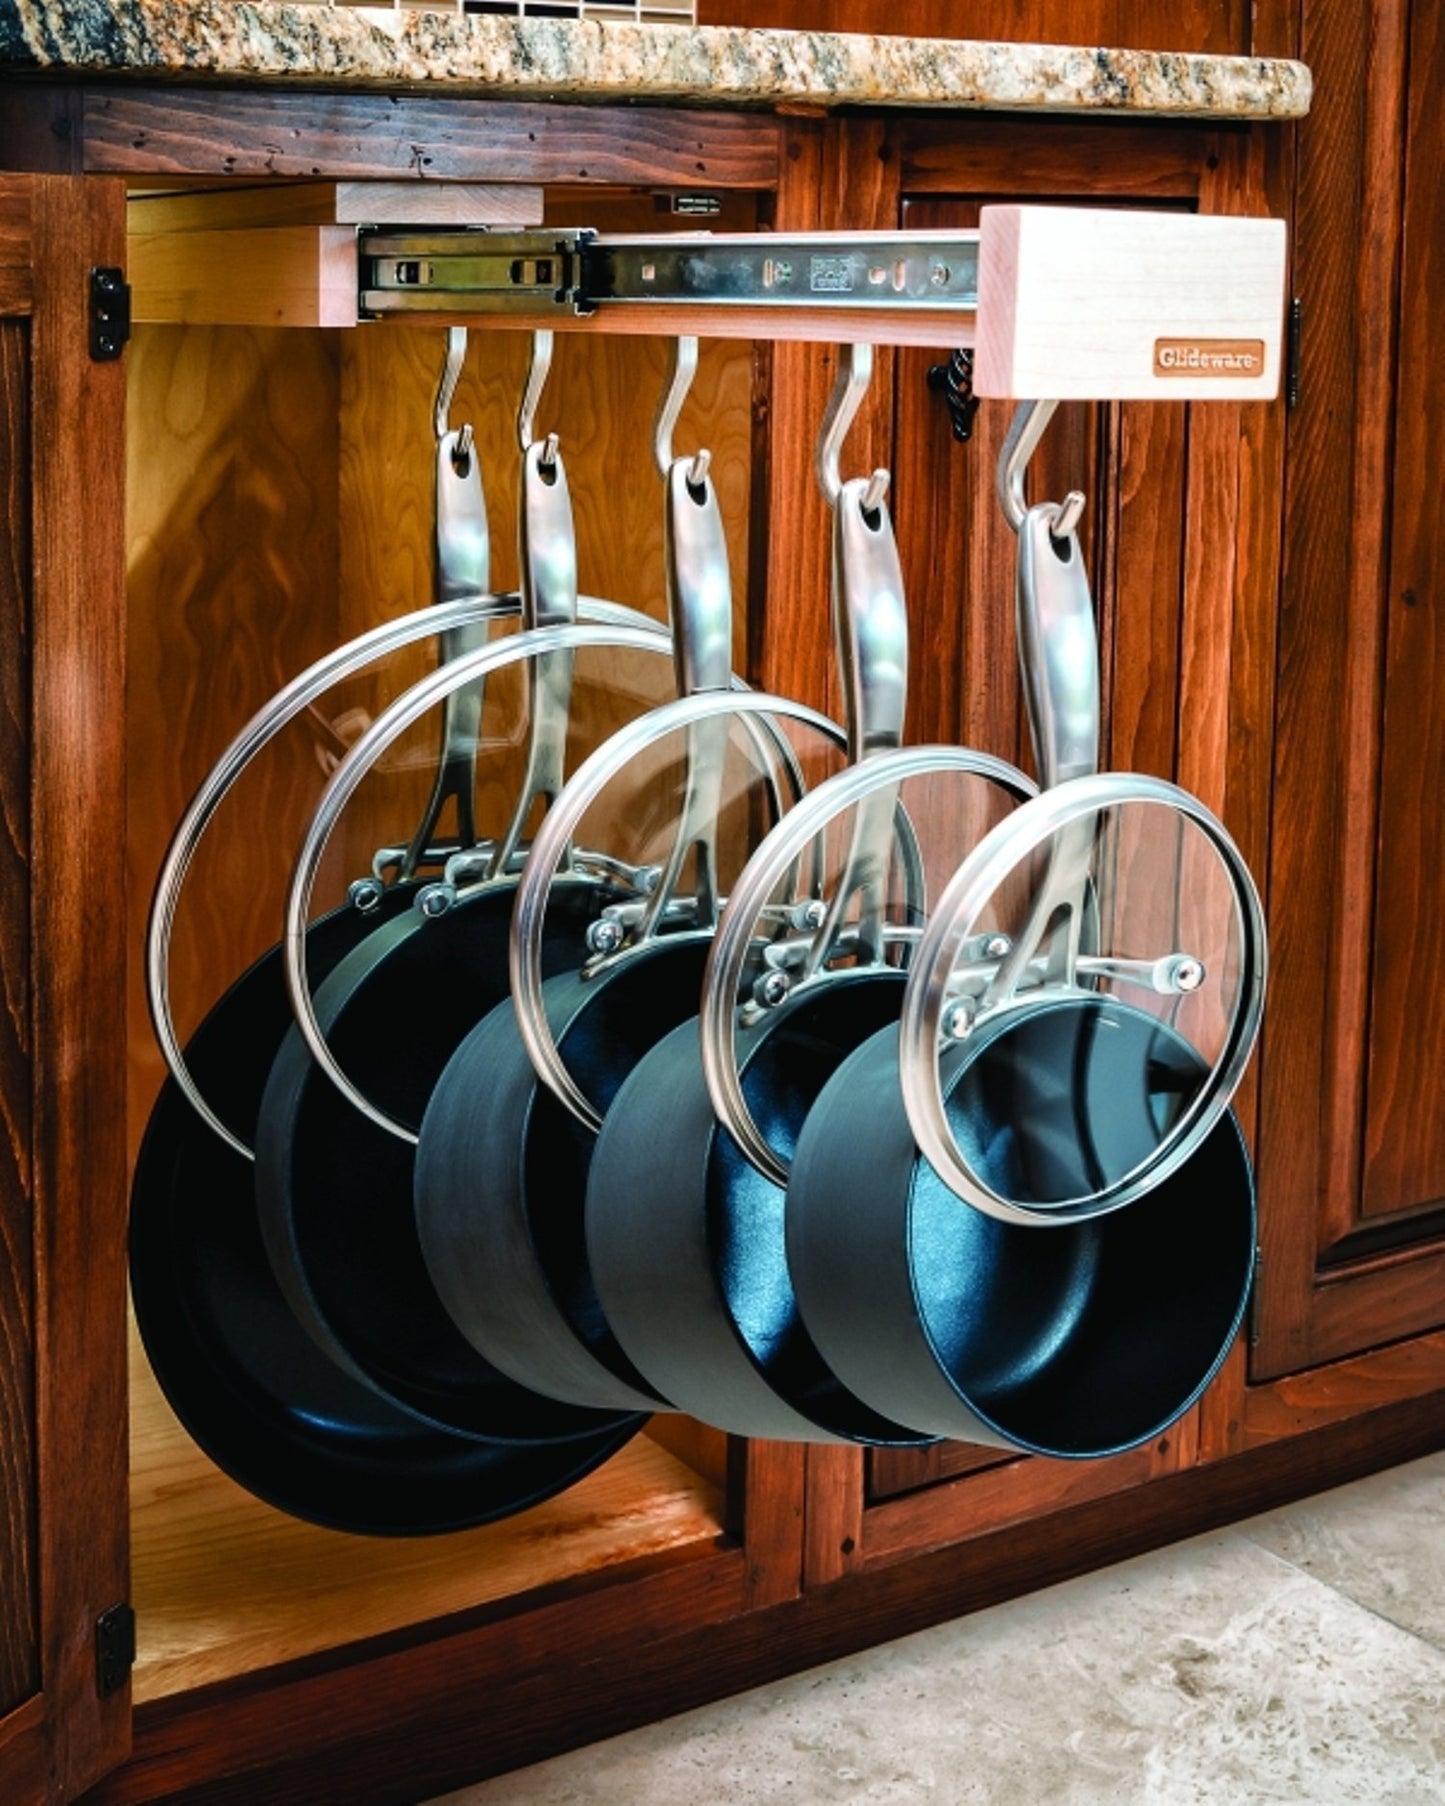 Glideware Pull-out Cabinet Organizer for Pots and Pans